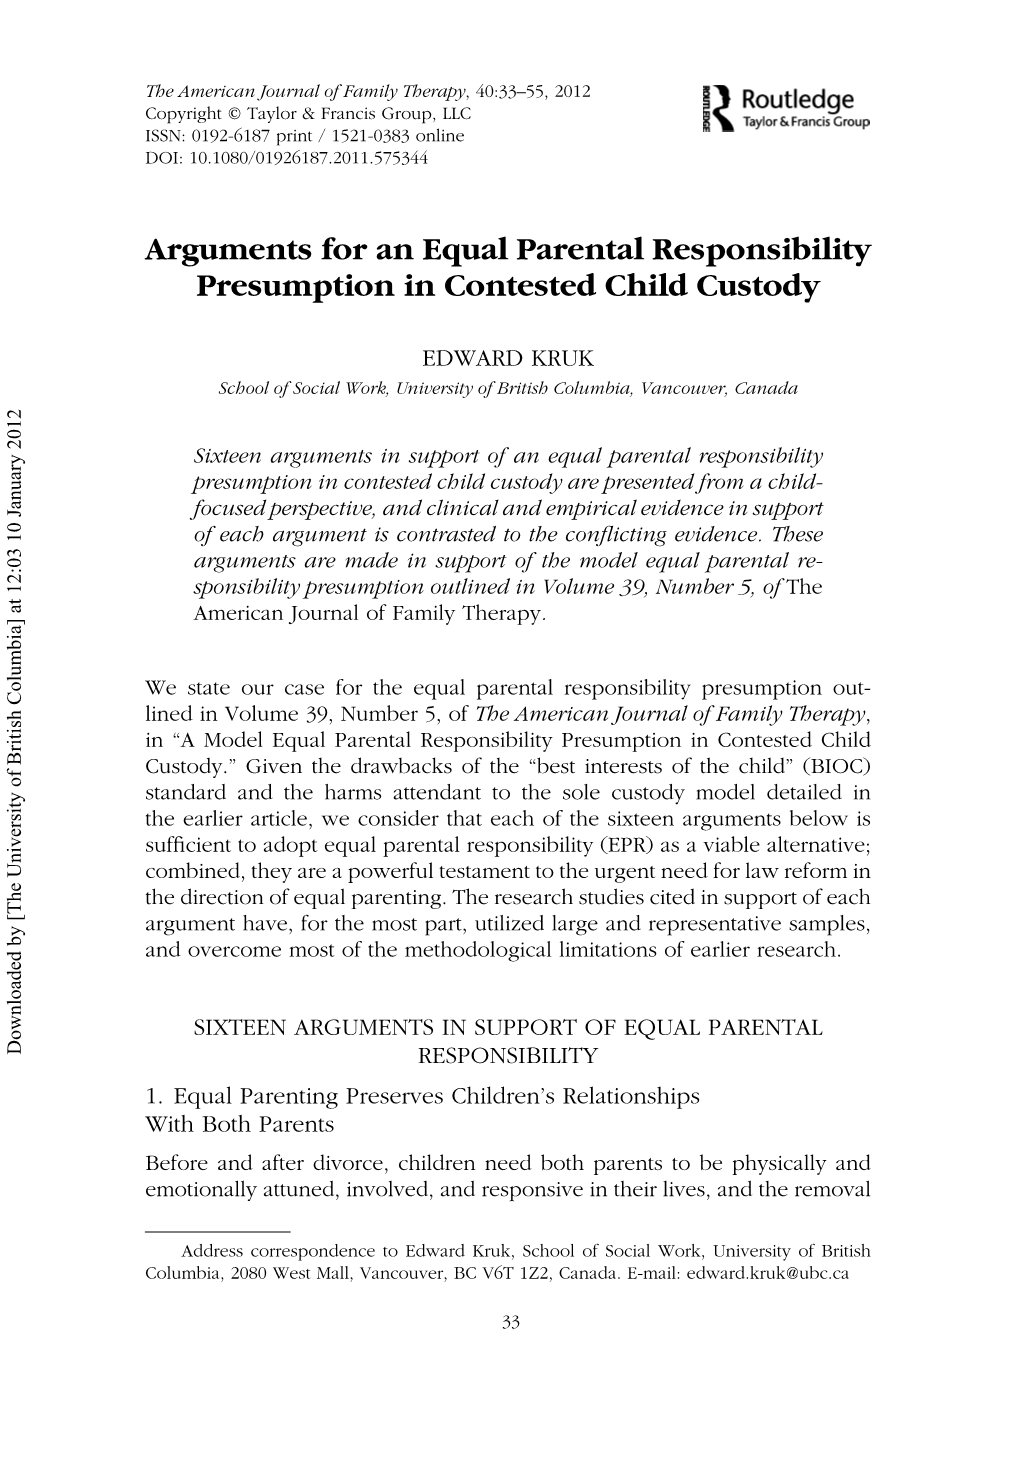 Arguments for an Equal Parental Responsibility Presumption in Contested Child Custody